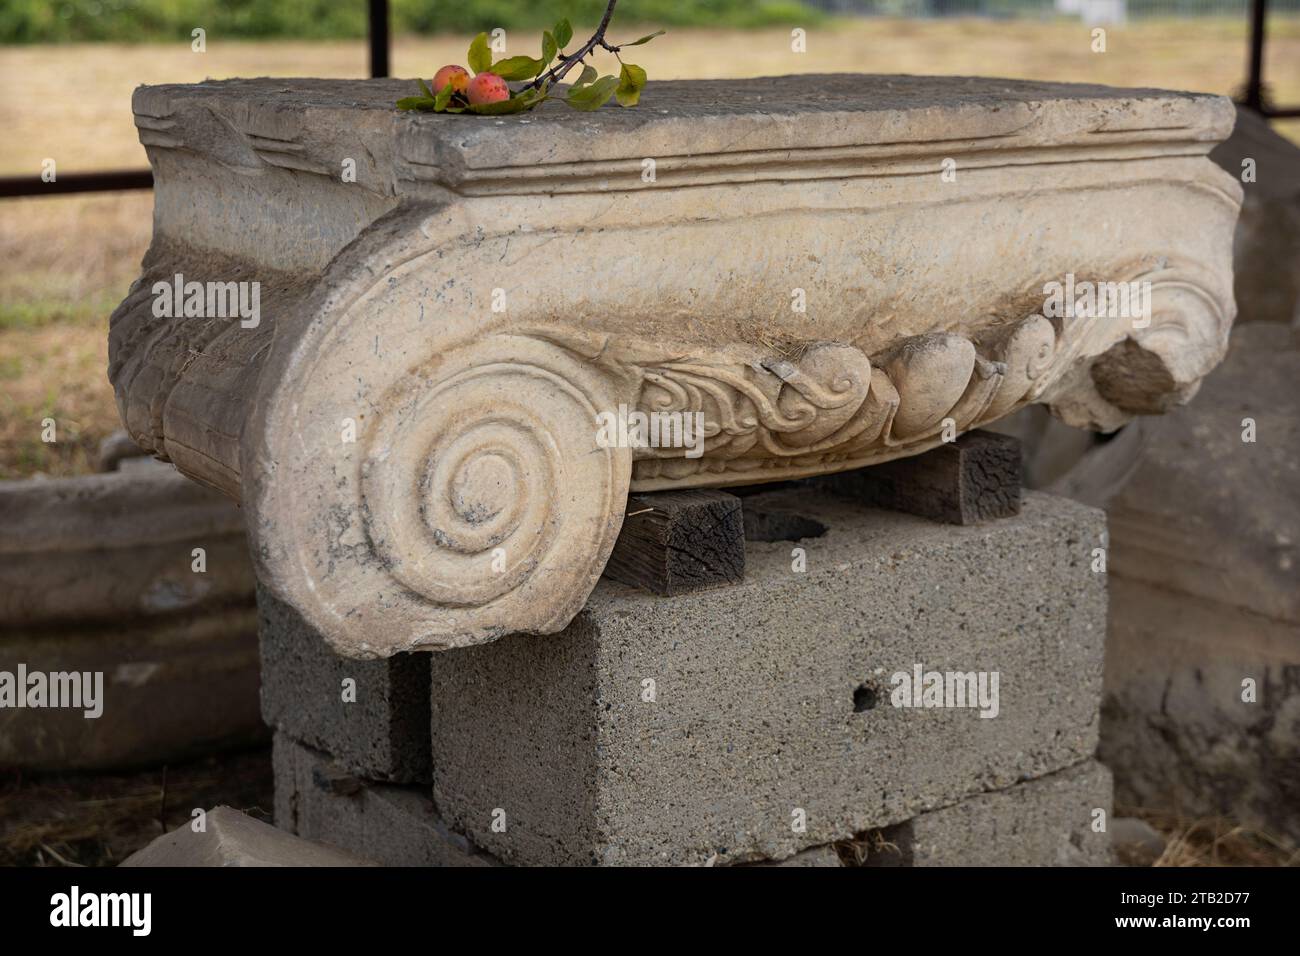 Luni Archaeological Site: Column Capital from Luni Etruscan settlement (became a Roman colony in 177 BC). Excavations near La Spezia, Liguria, Italy. Stock Photo